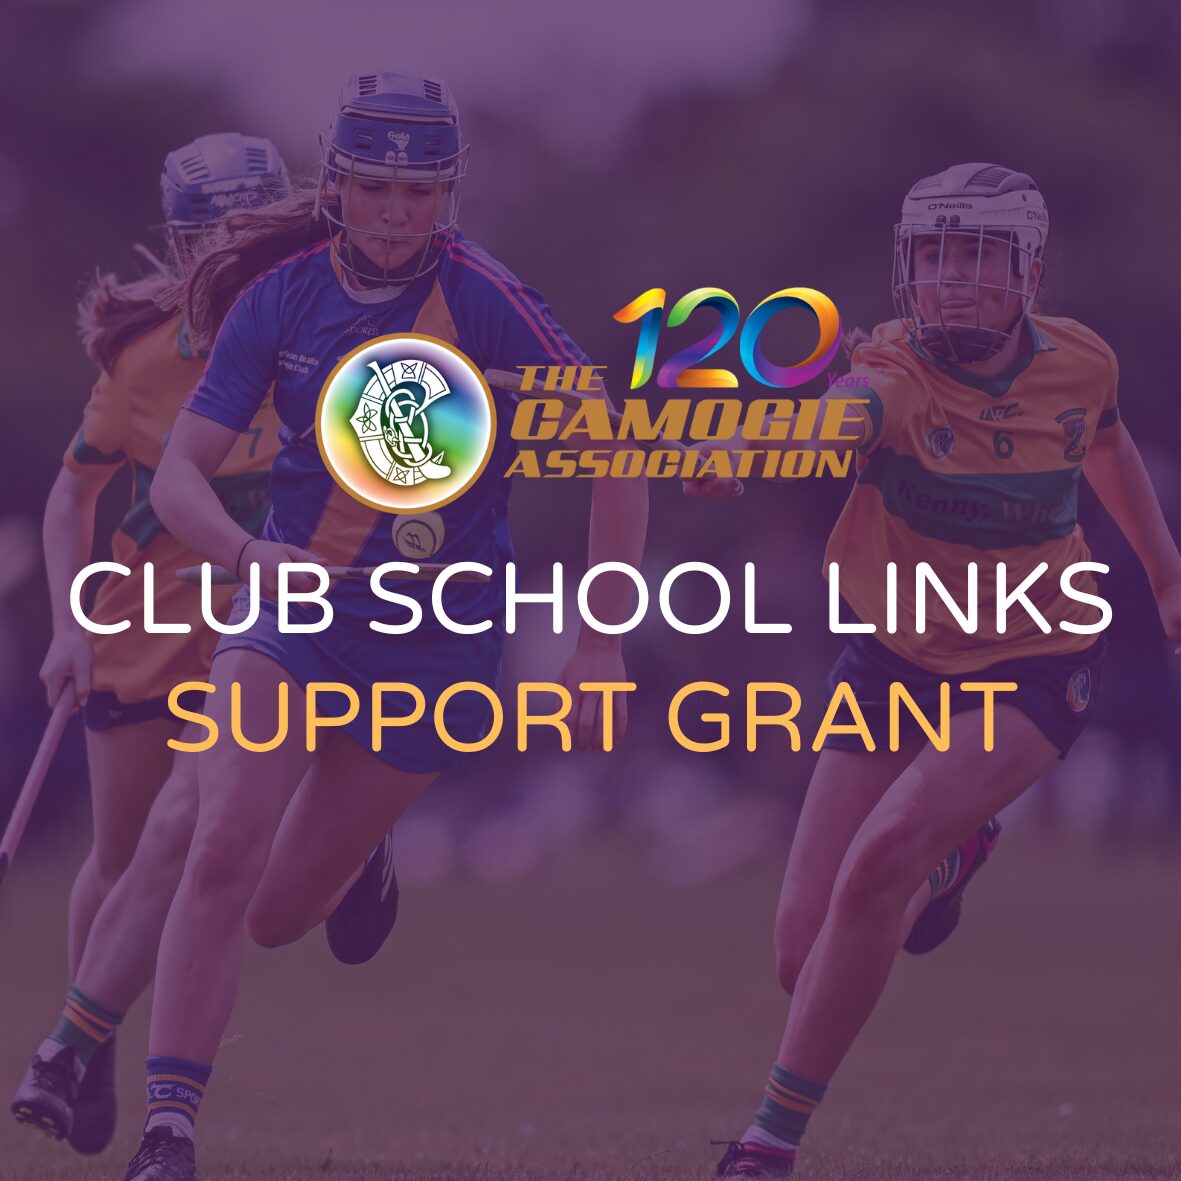 Camogie Association Club School Links Support Grant